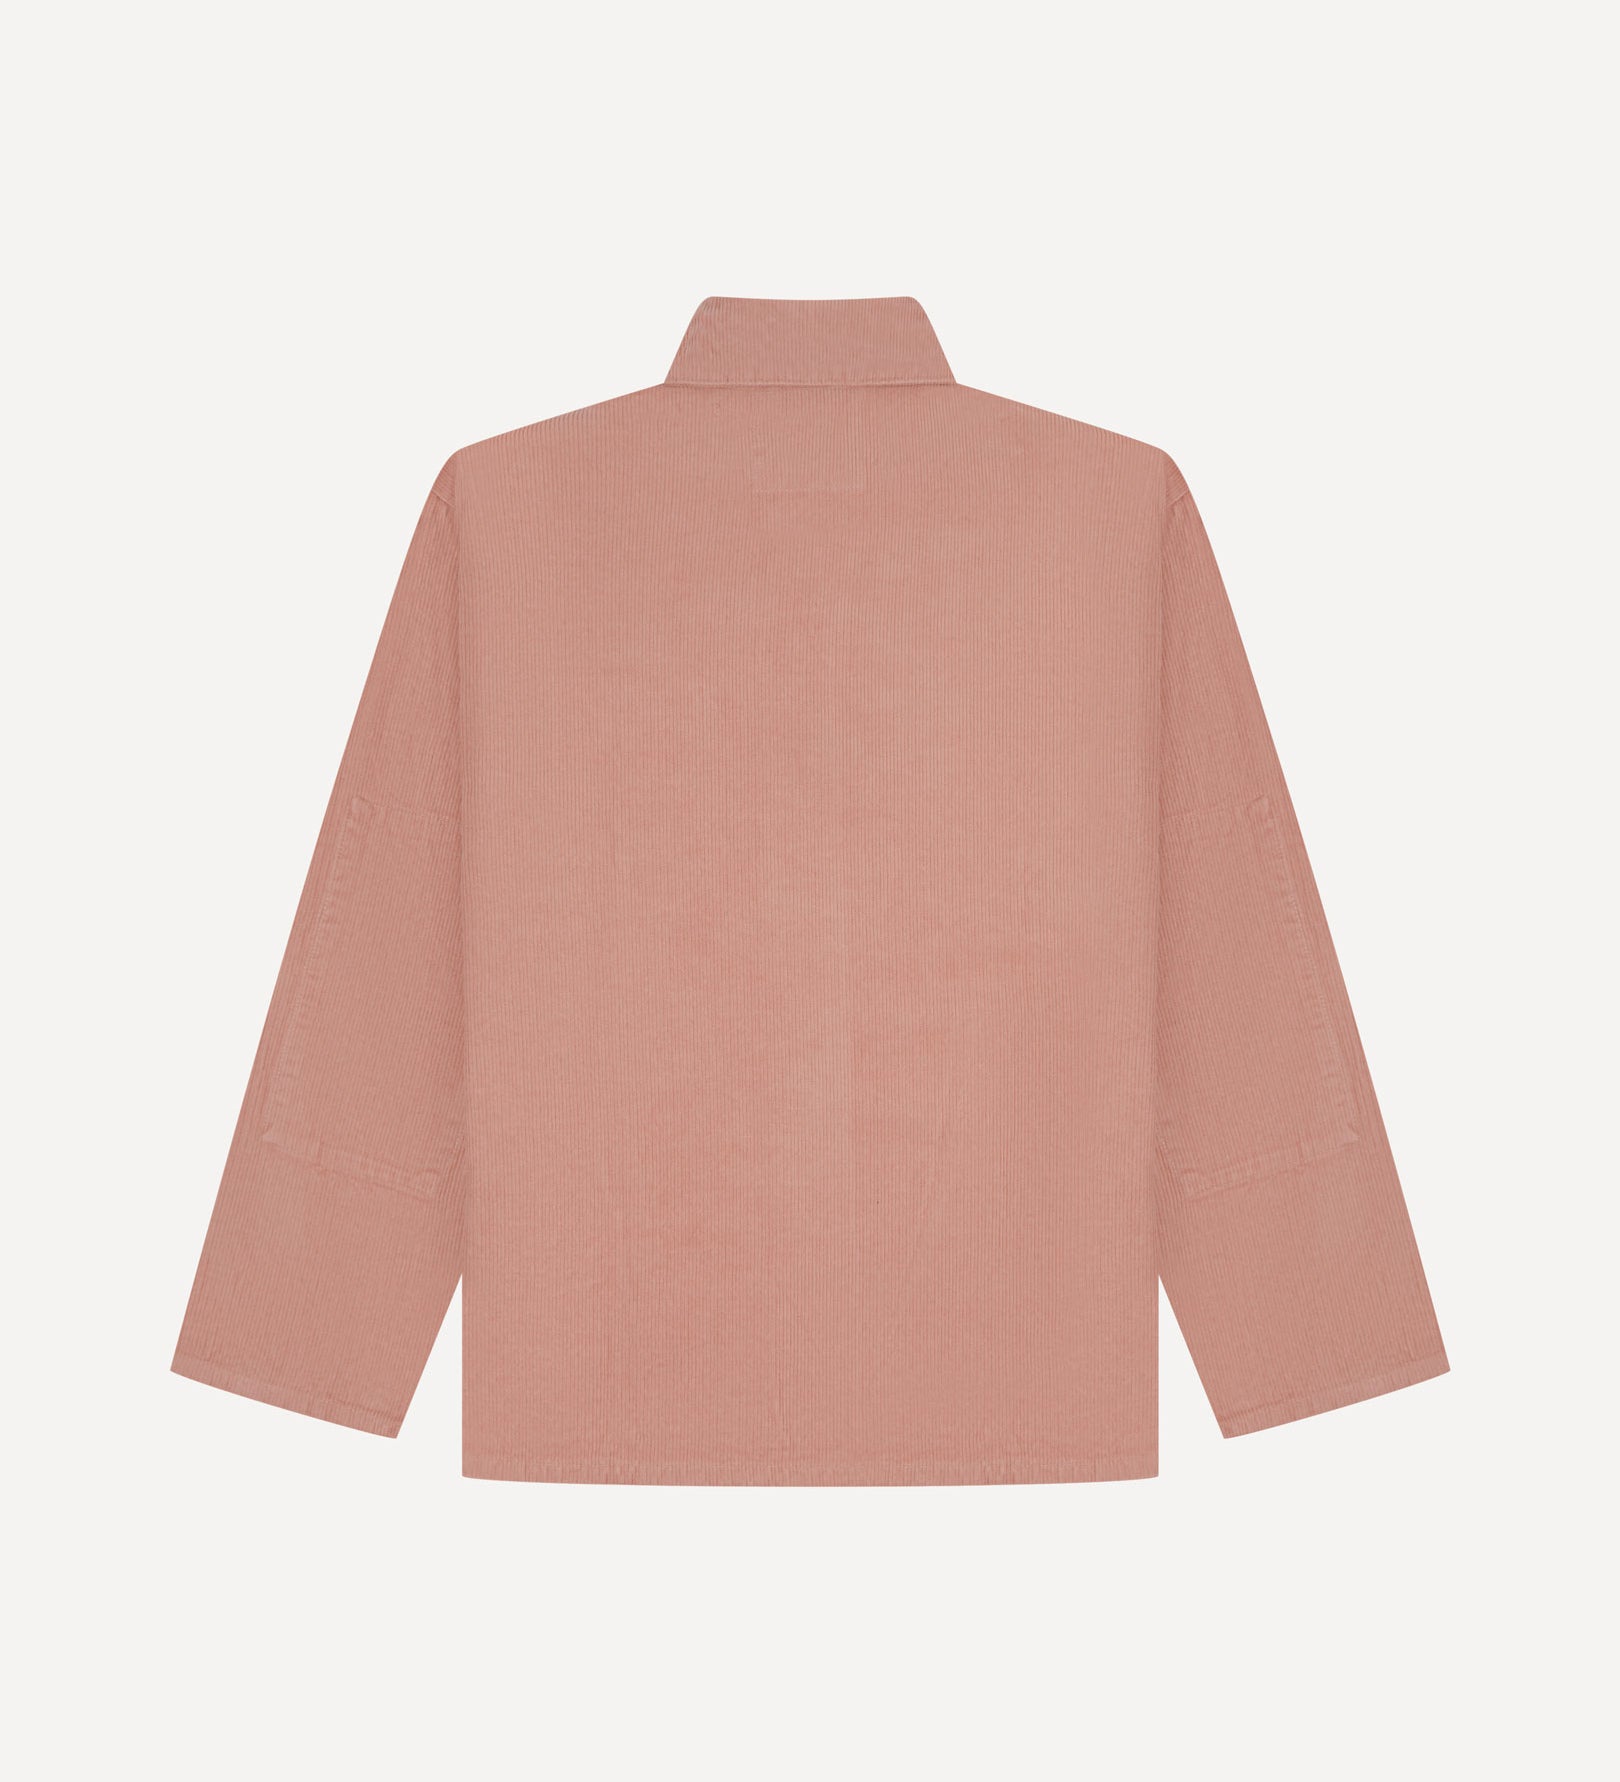 Back view of dusty pink, buttoned corduroy overshirt with view of reinforced elbow area and boxy silhouette.